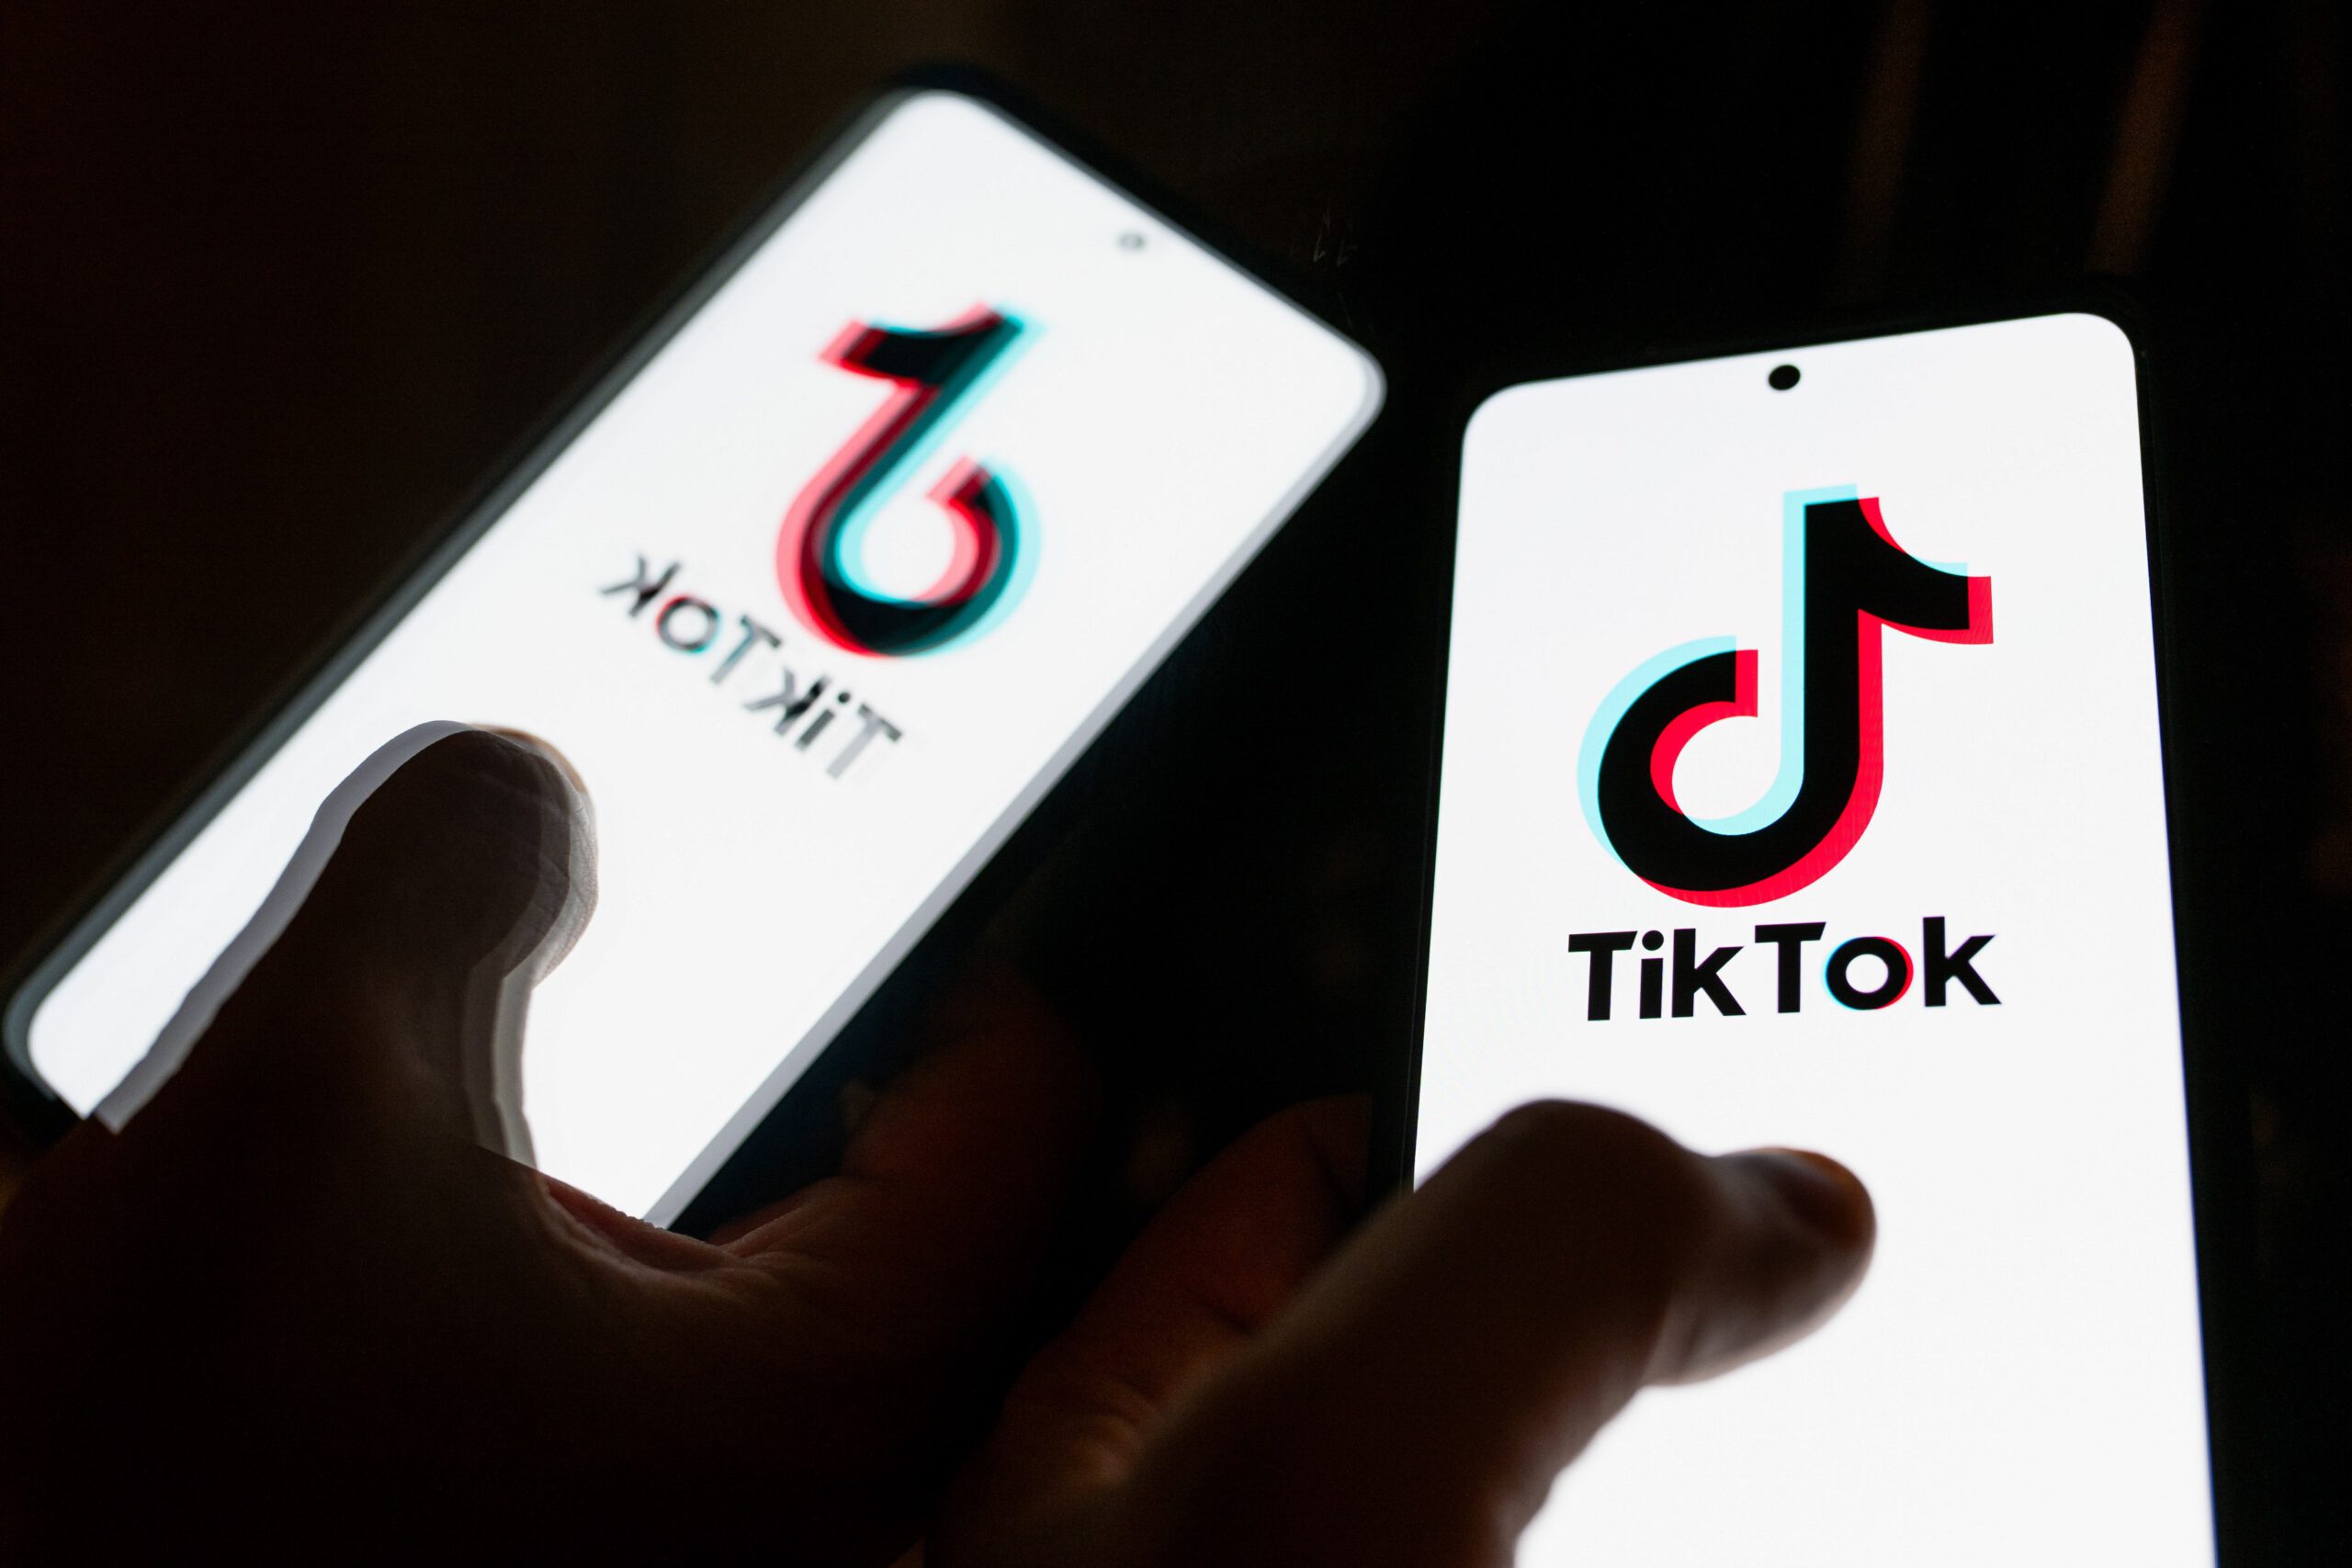 A iPhone screen displaying the TikTok logo reflected in a mirror.